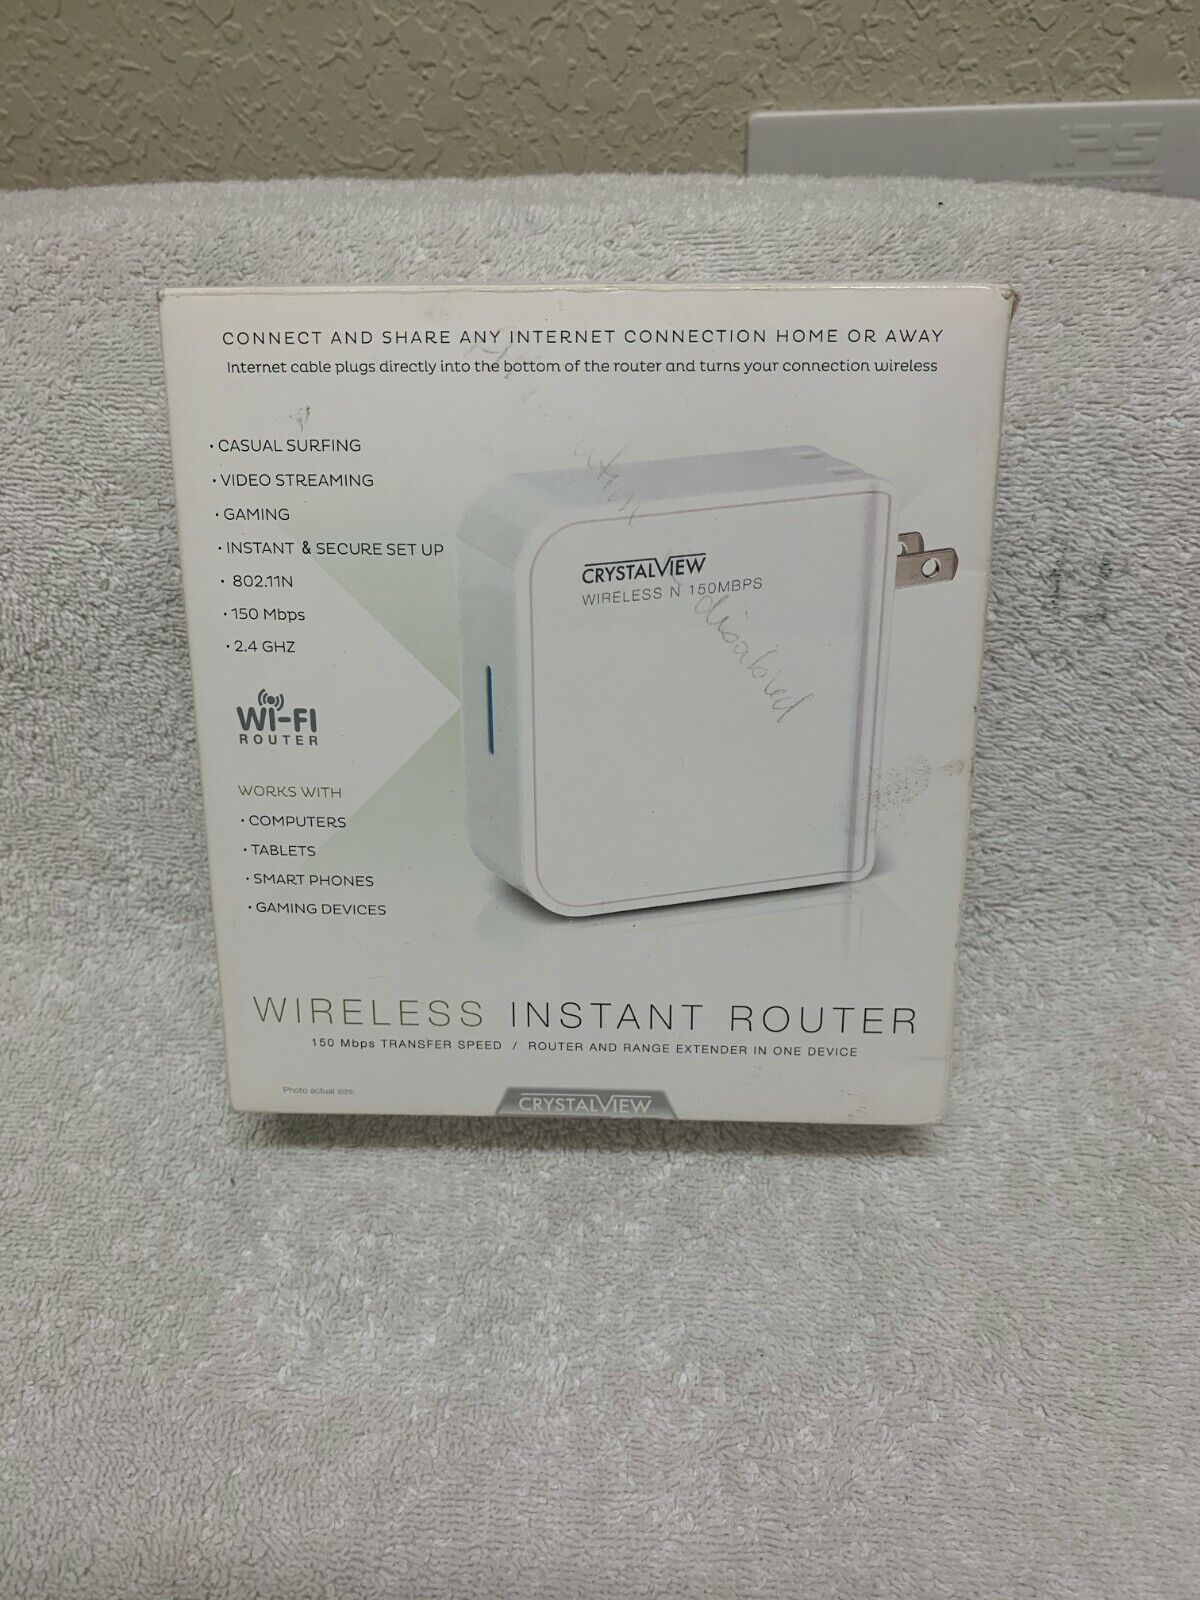 CrystalView Wireless Router And Range Extender